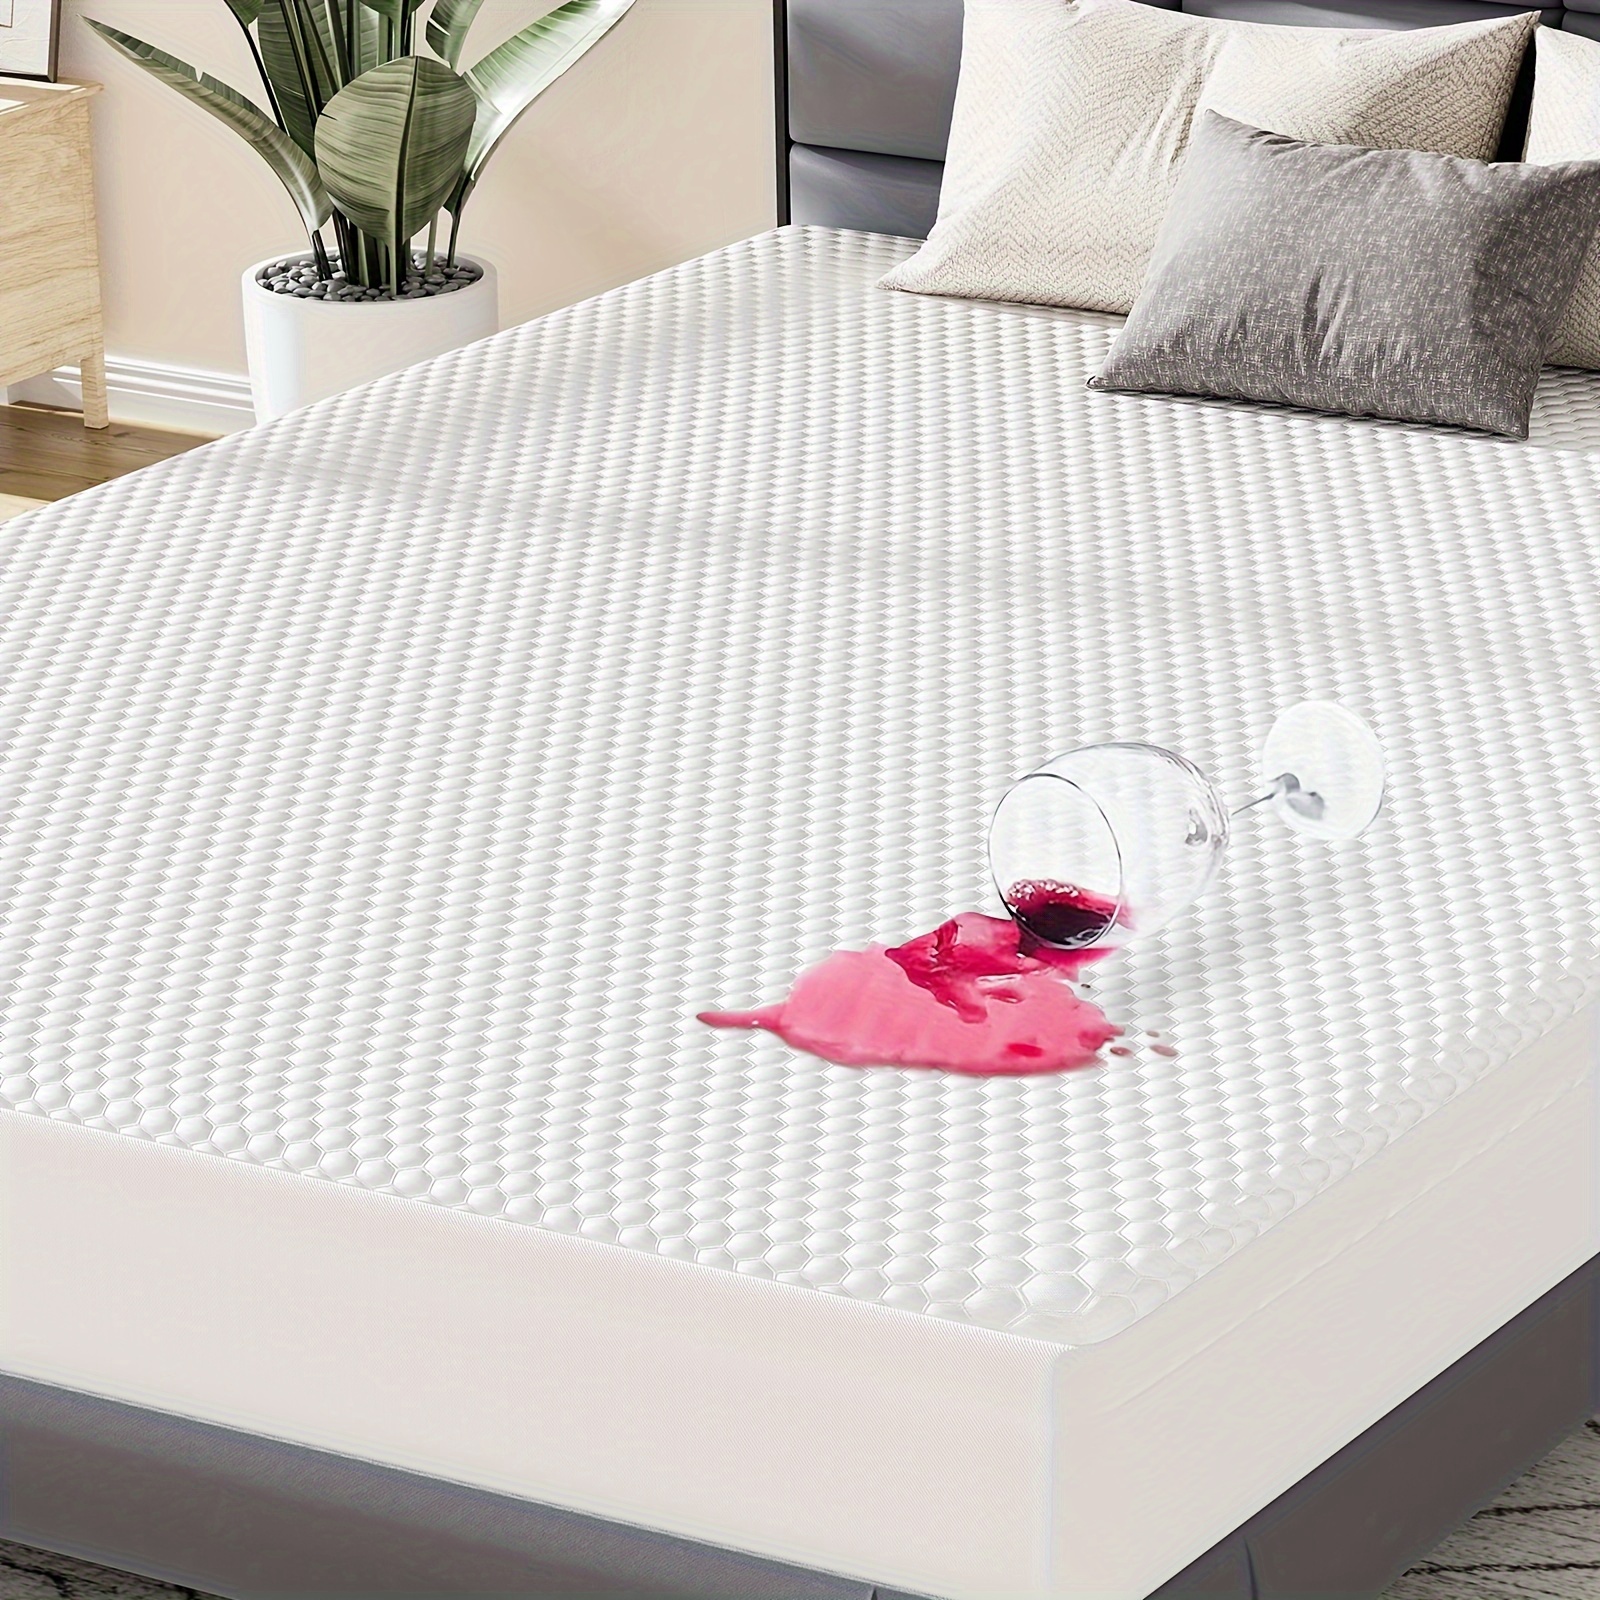 

Twin/full/queen/king Size Waterproof Mattress Protector Viscose Made From Bamboo Mattress Pad Cover Noiseless Washable With Deep Pocket Up To 21